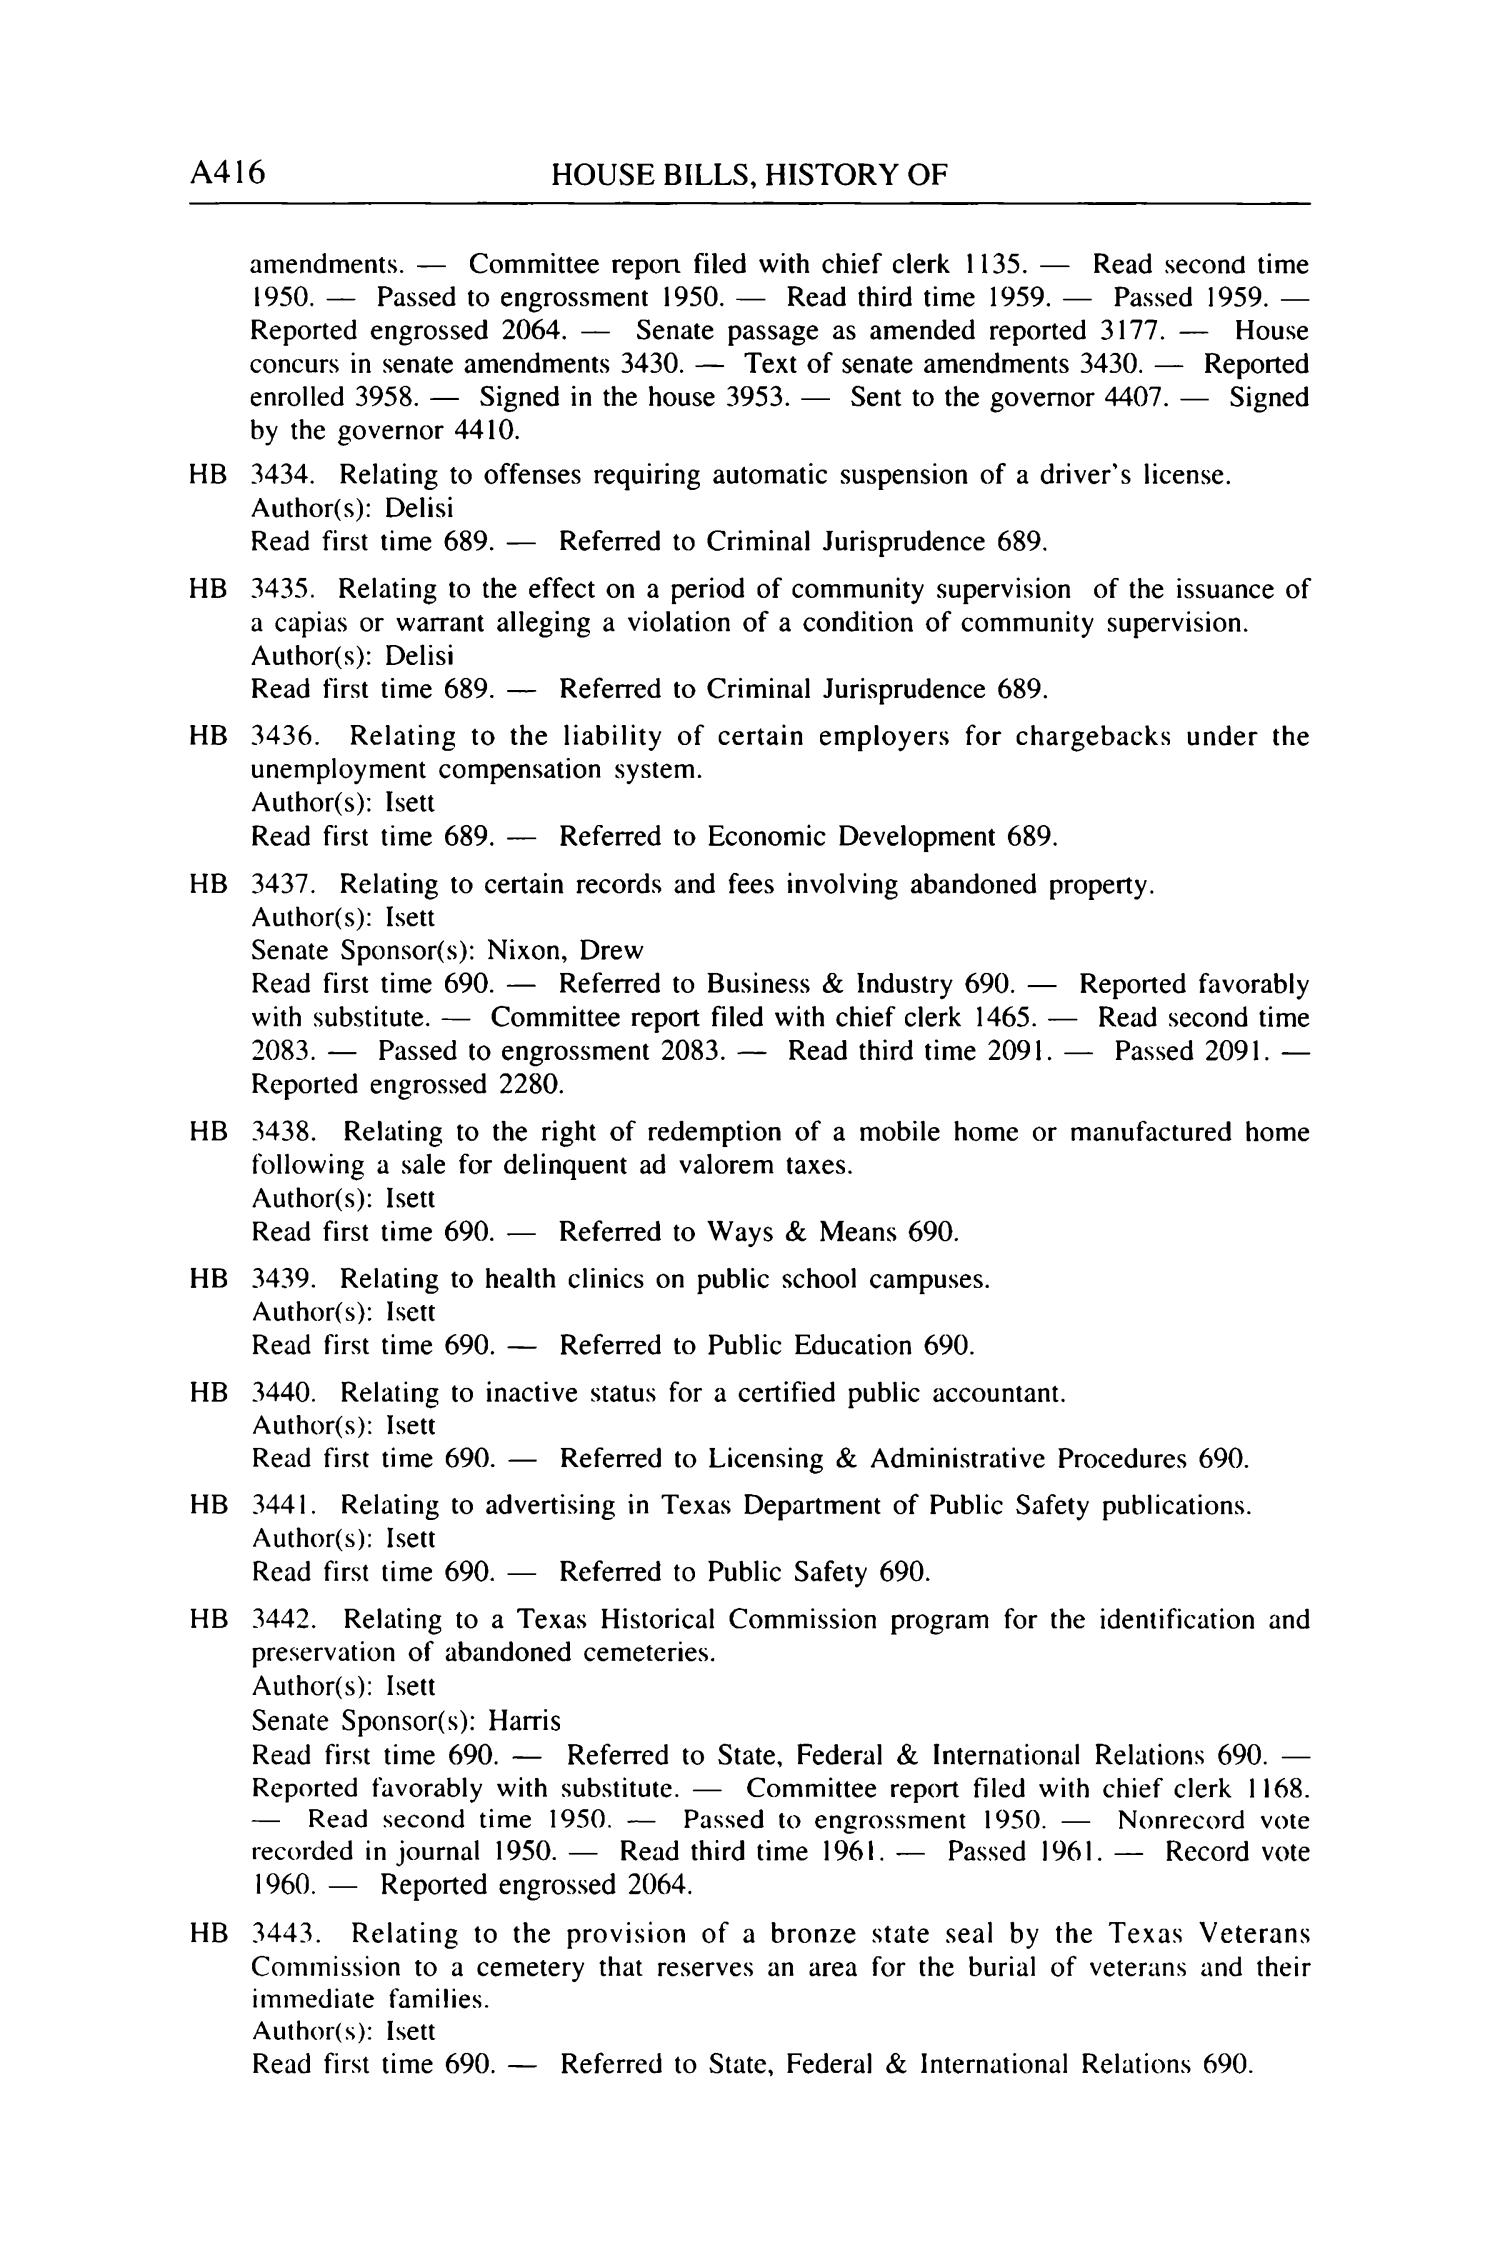 Journal of the House of Representatives of the Regular Session of the Seventy-Sixth Legislature of the State of Texas, Volume 5
                                                
                                                    A416
                                                